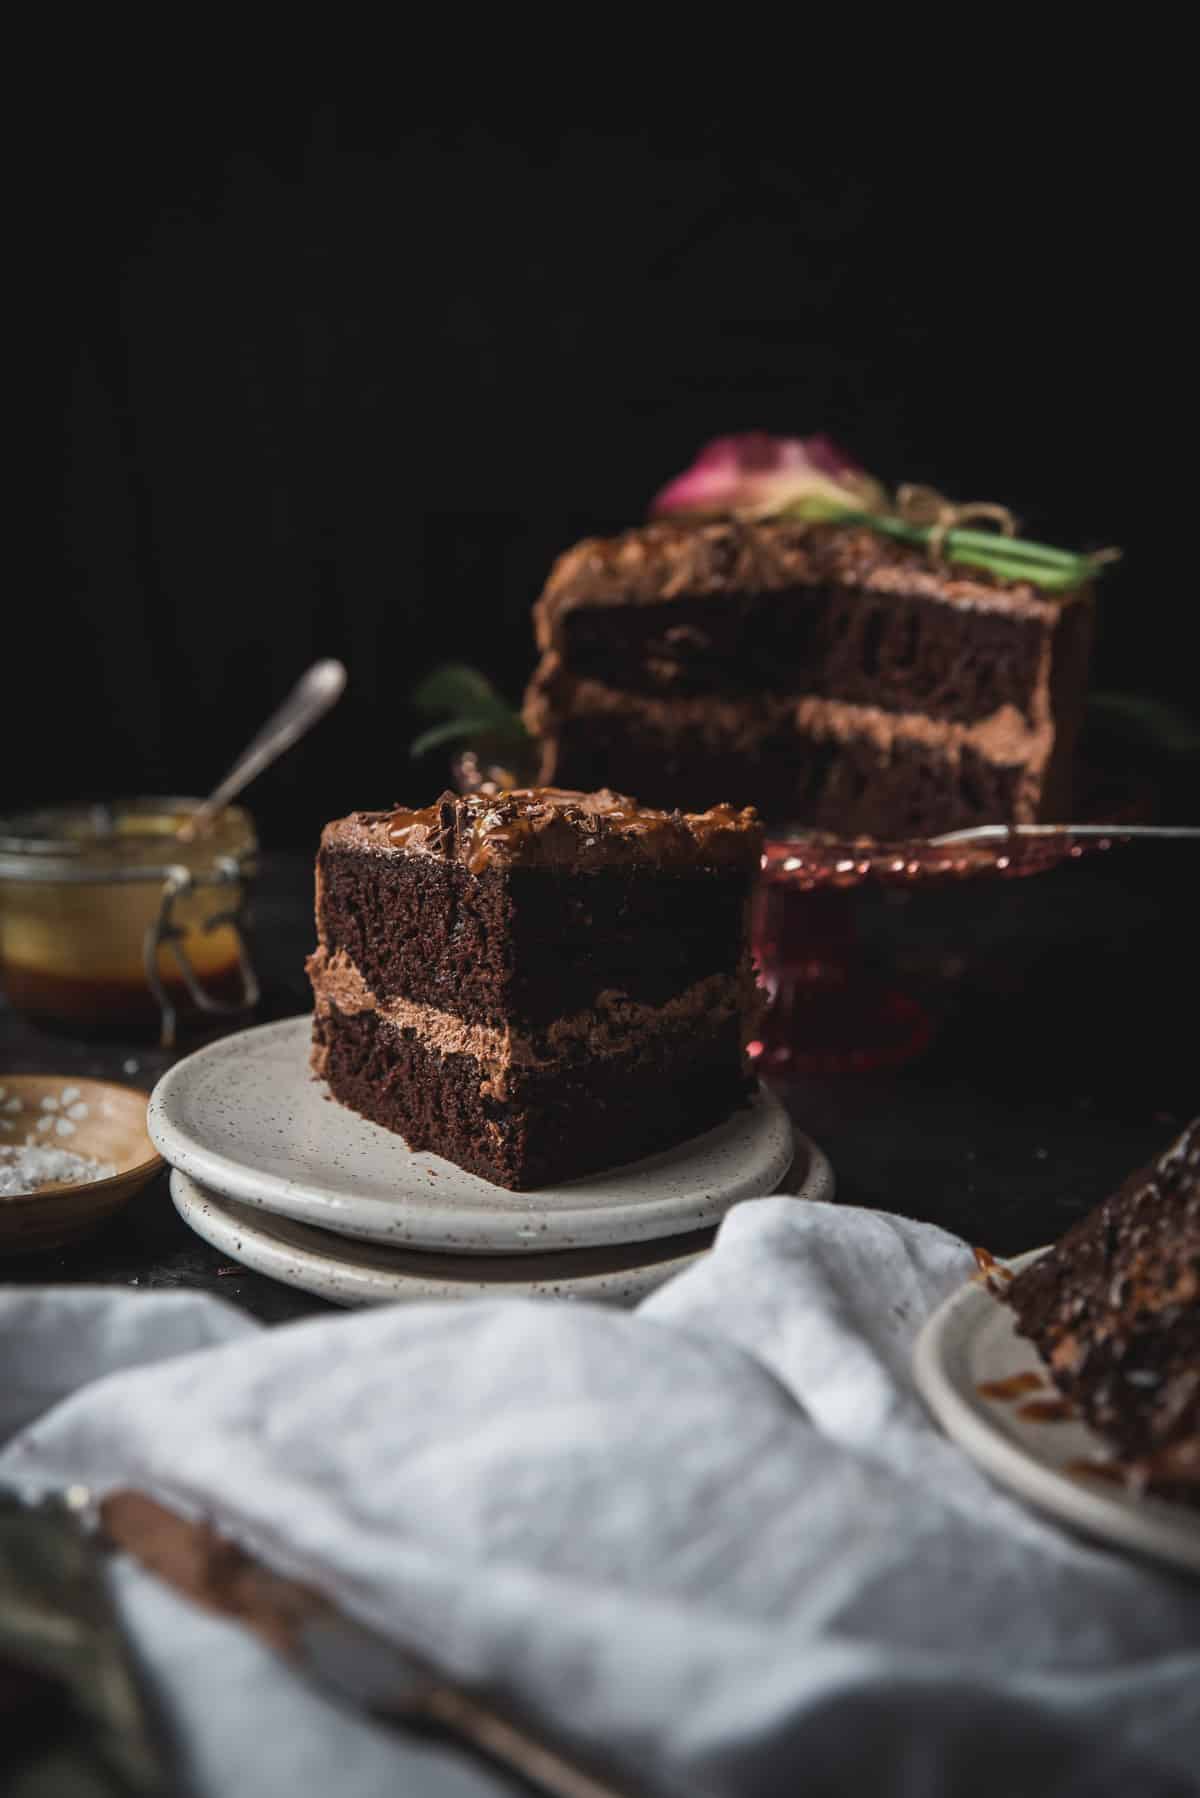 slice of chocolate layer cake on a plate with the cake in the background